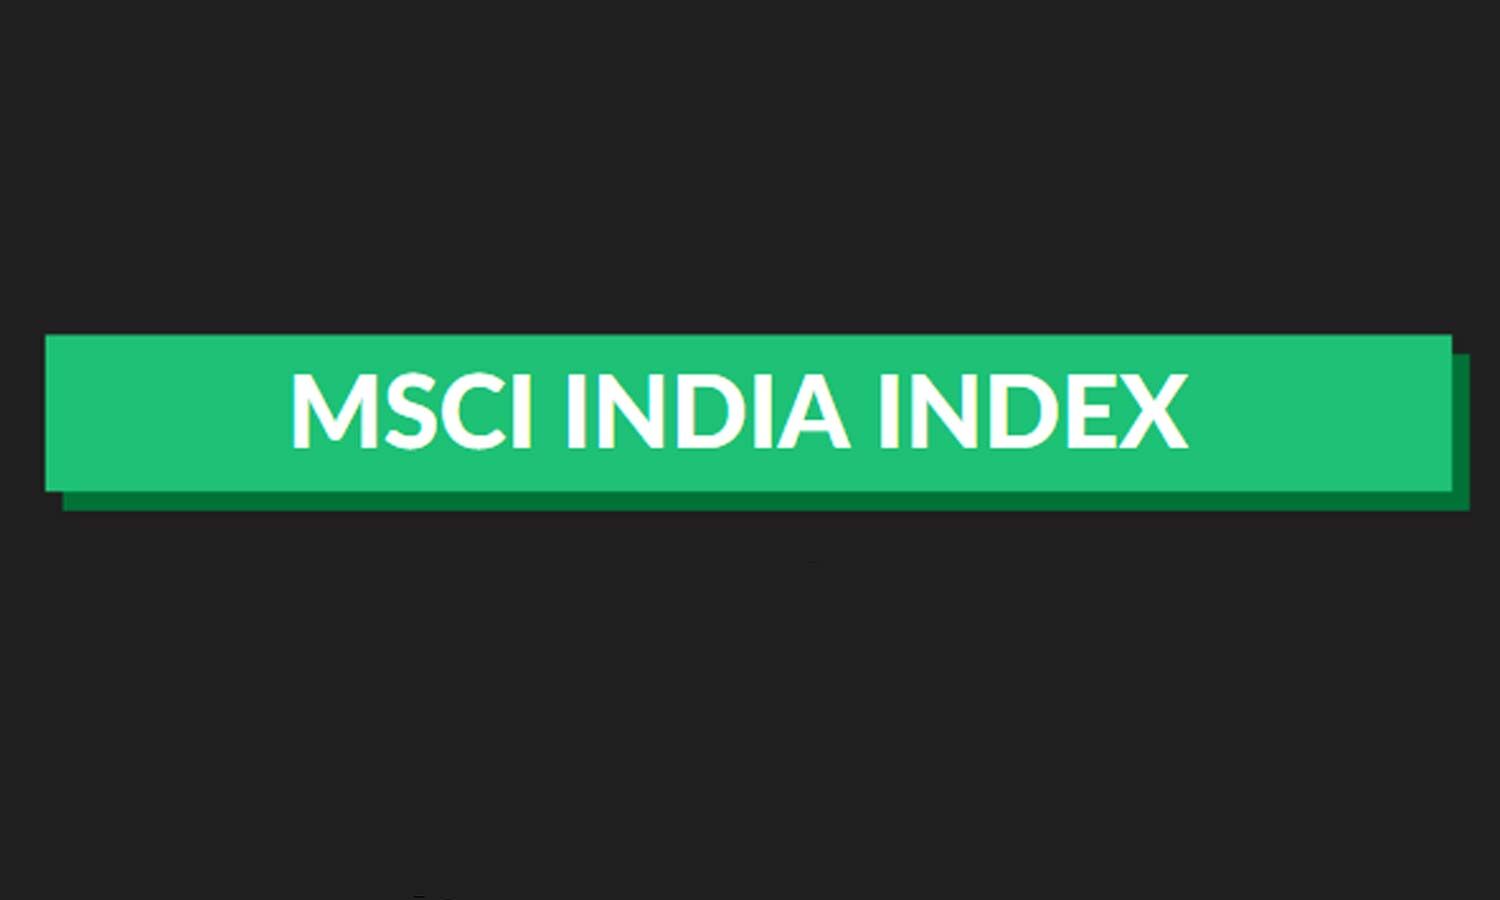 Five companies added to MSCI India Index; four deleted